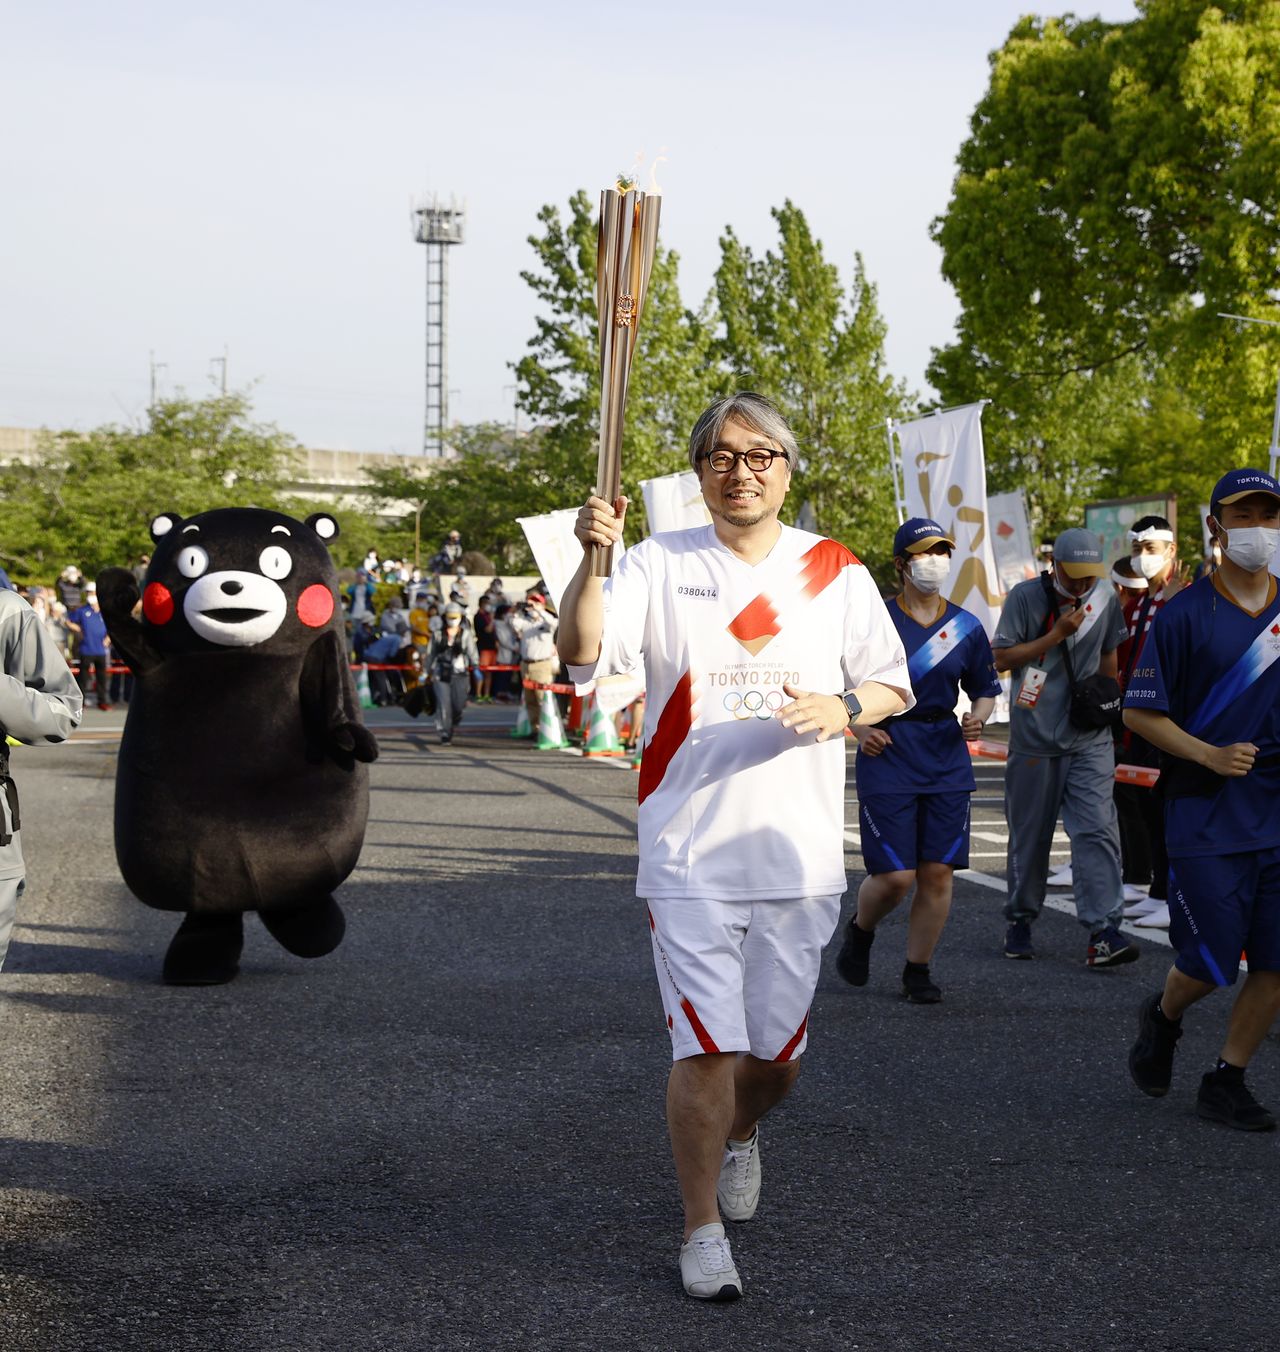 The project’s creative lead Koyama Kundō, with Kumamon following close behind, carries the Olympic flame through Uto in Kumamoto Prefecture on May 5, 2021, during a leg of the Tokyo 2020 torch relay. (© Jiji)